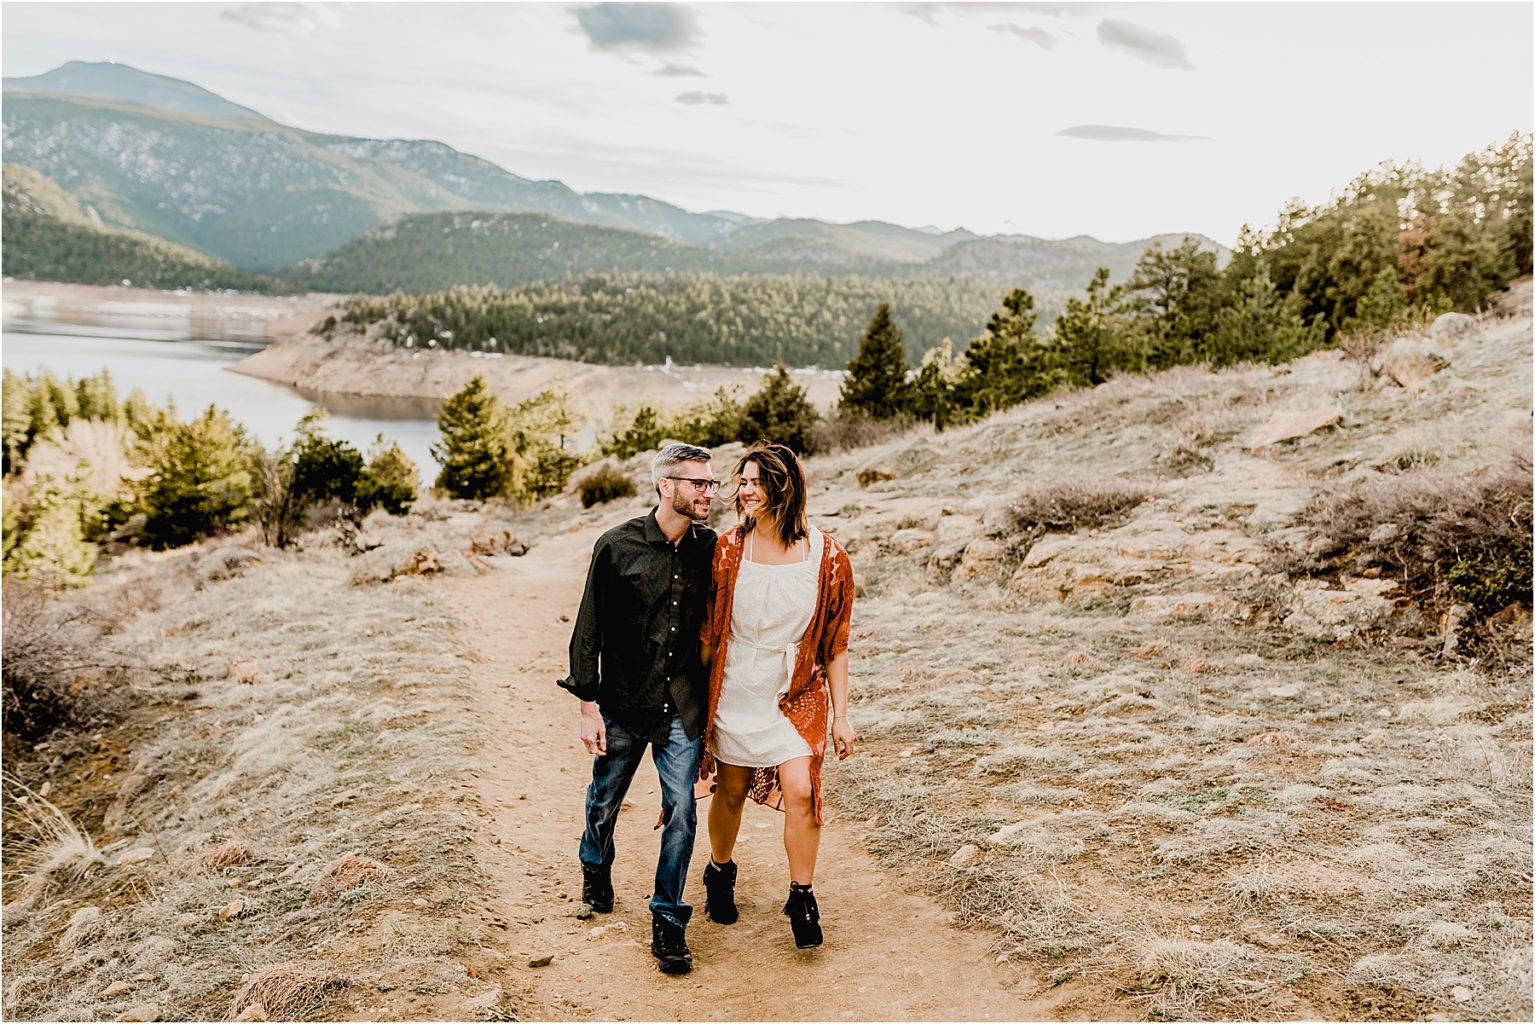 Marissa and Casey's adventure anniversary session in boulder, colorado. We ran around this beautiful mountain location and shared so many laughs!